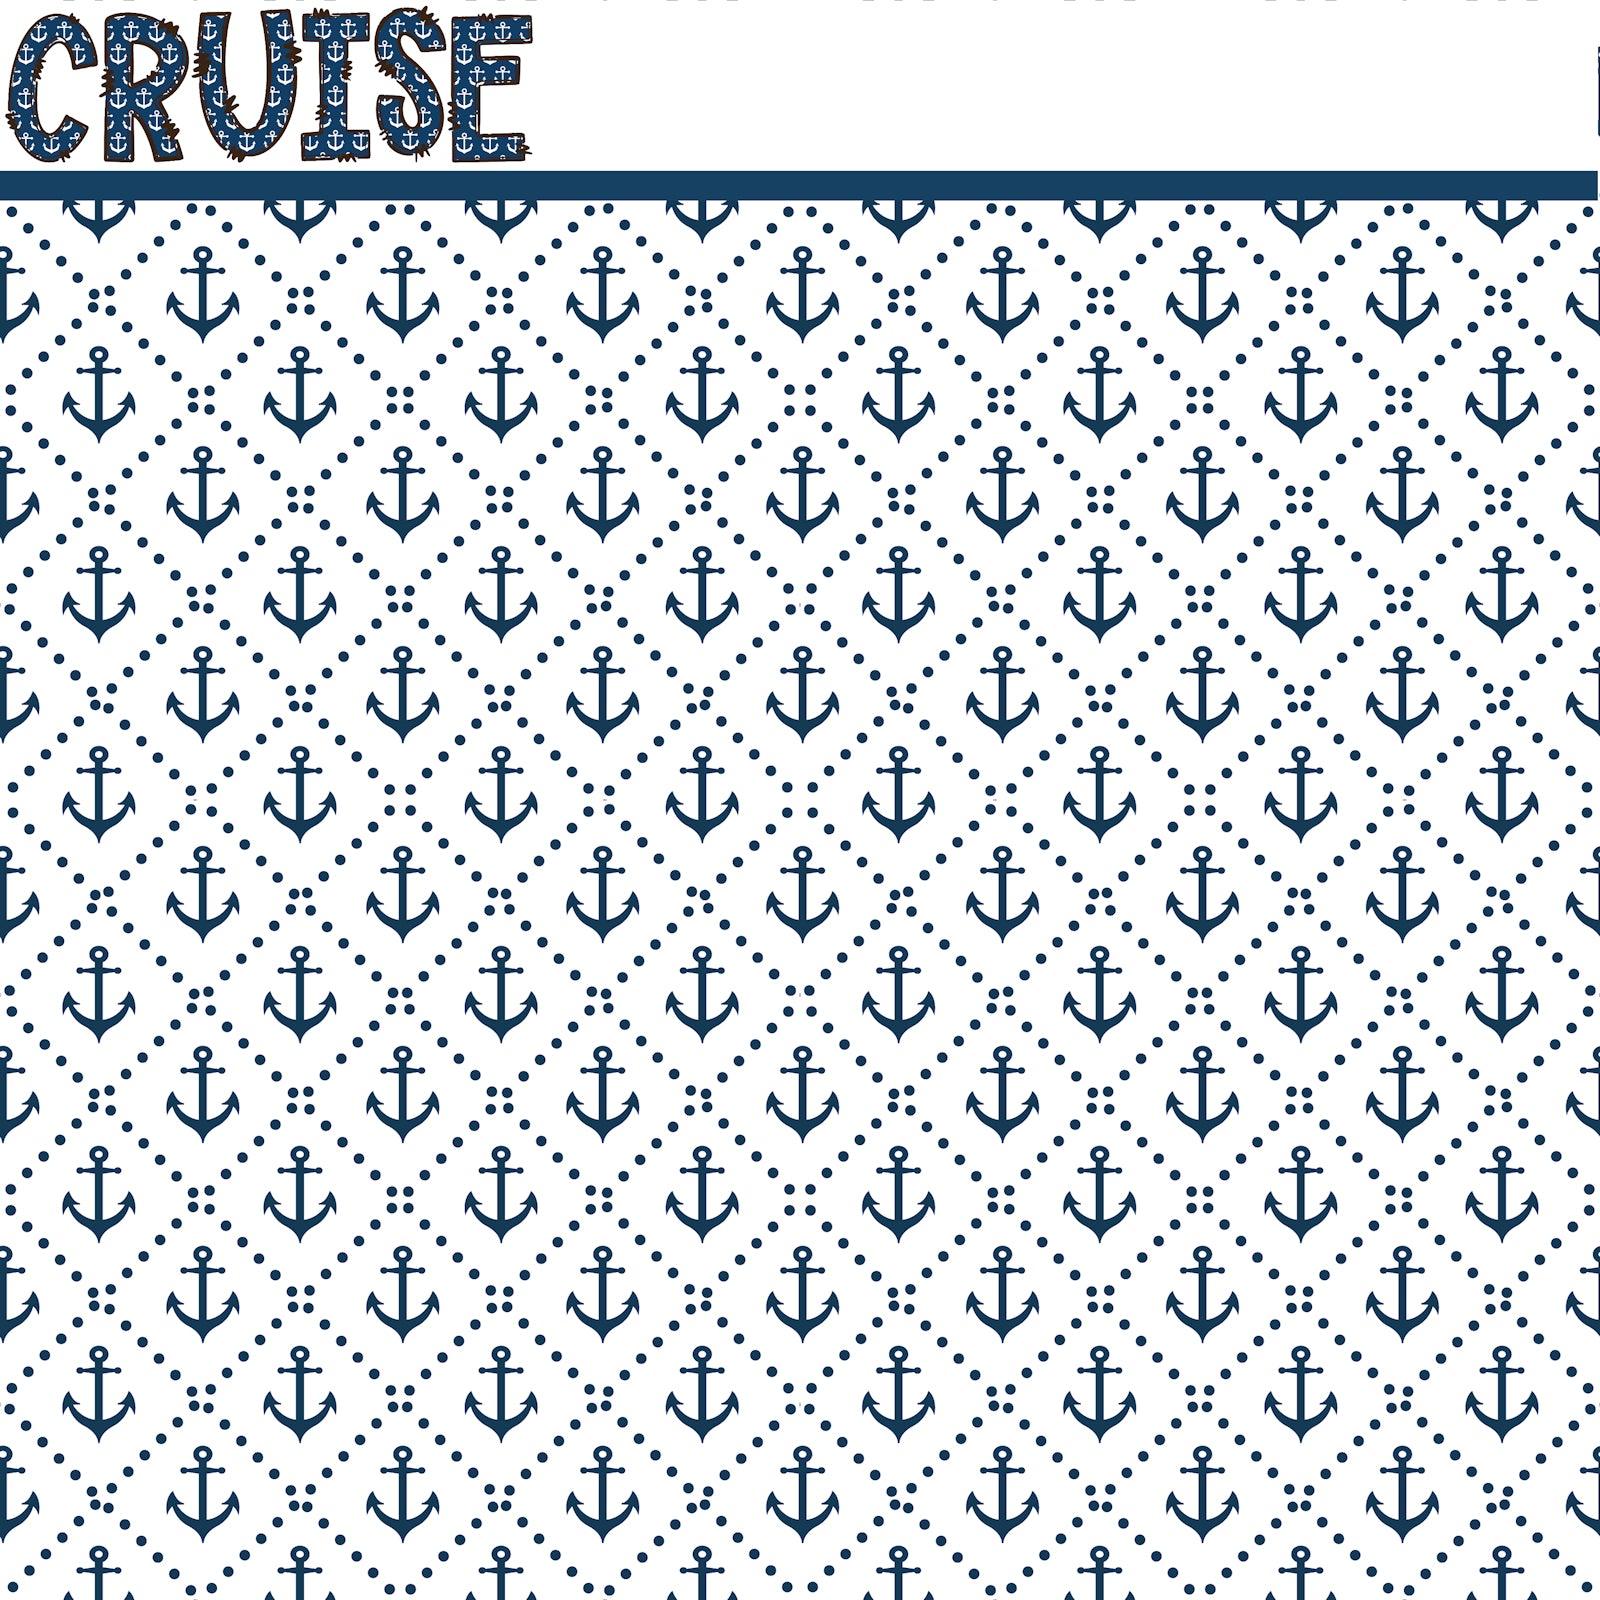 Cruise Collection Cruise 2022 12 x 12 Double-Sided Scrapbook Paper by SSC Designs - Scrapbook Supply Companies